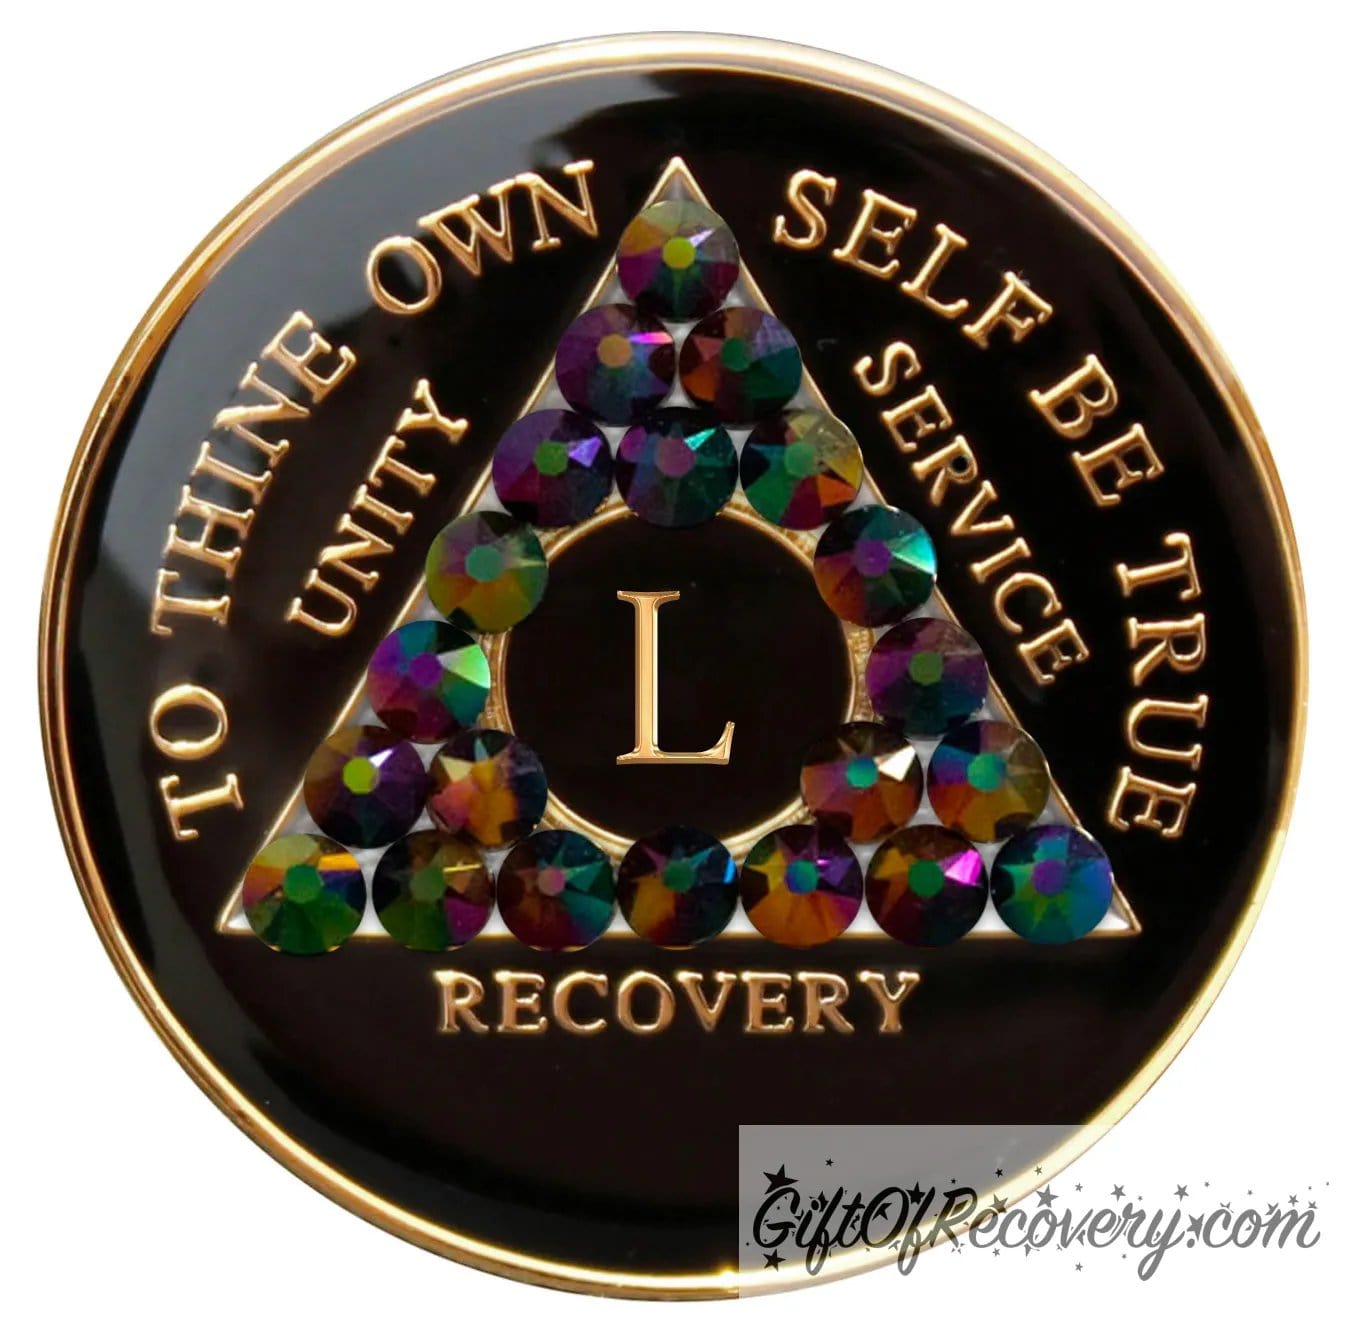 55 year black onyx AA recovery medallion, with 21 genuine peacock crystals, symbolizing the beauty and diversity of recovery journeys, the AA medallion has; to thine own self be true, unity, service, recovery, roman numeral, and the rim, embossed with 14k gold and sealed with resin for a glossy finish.